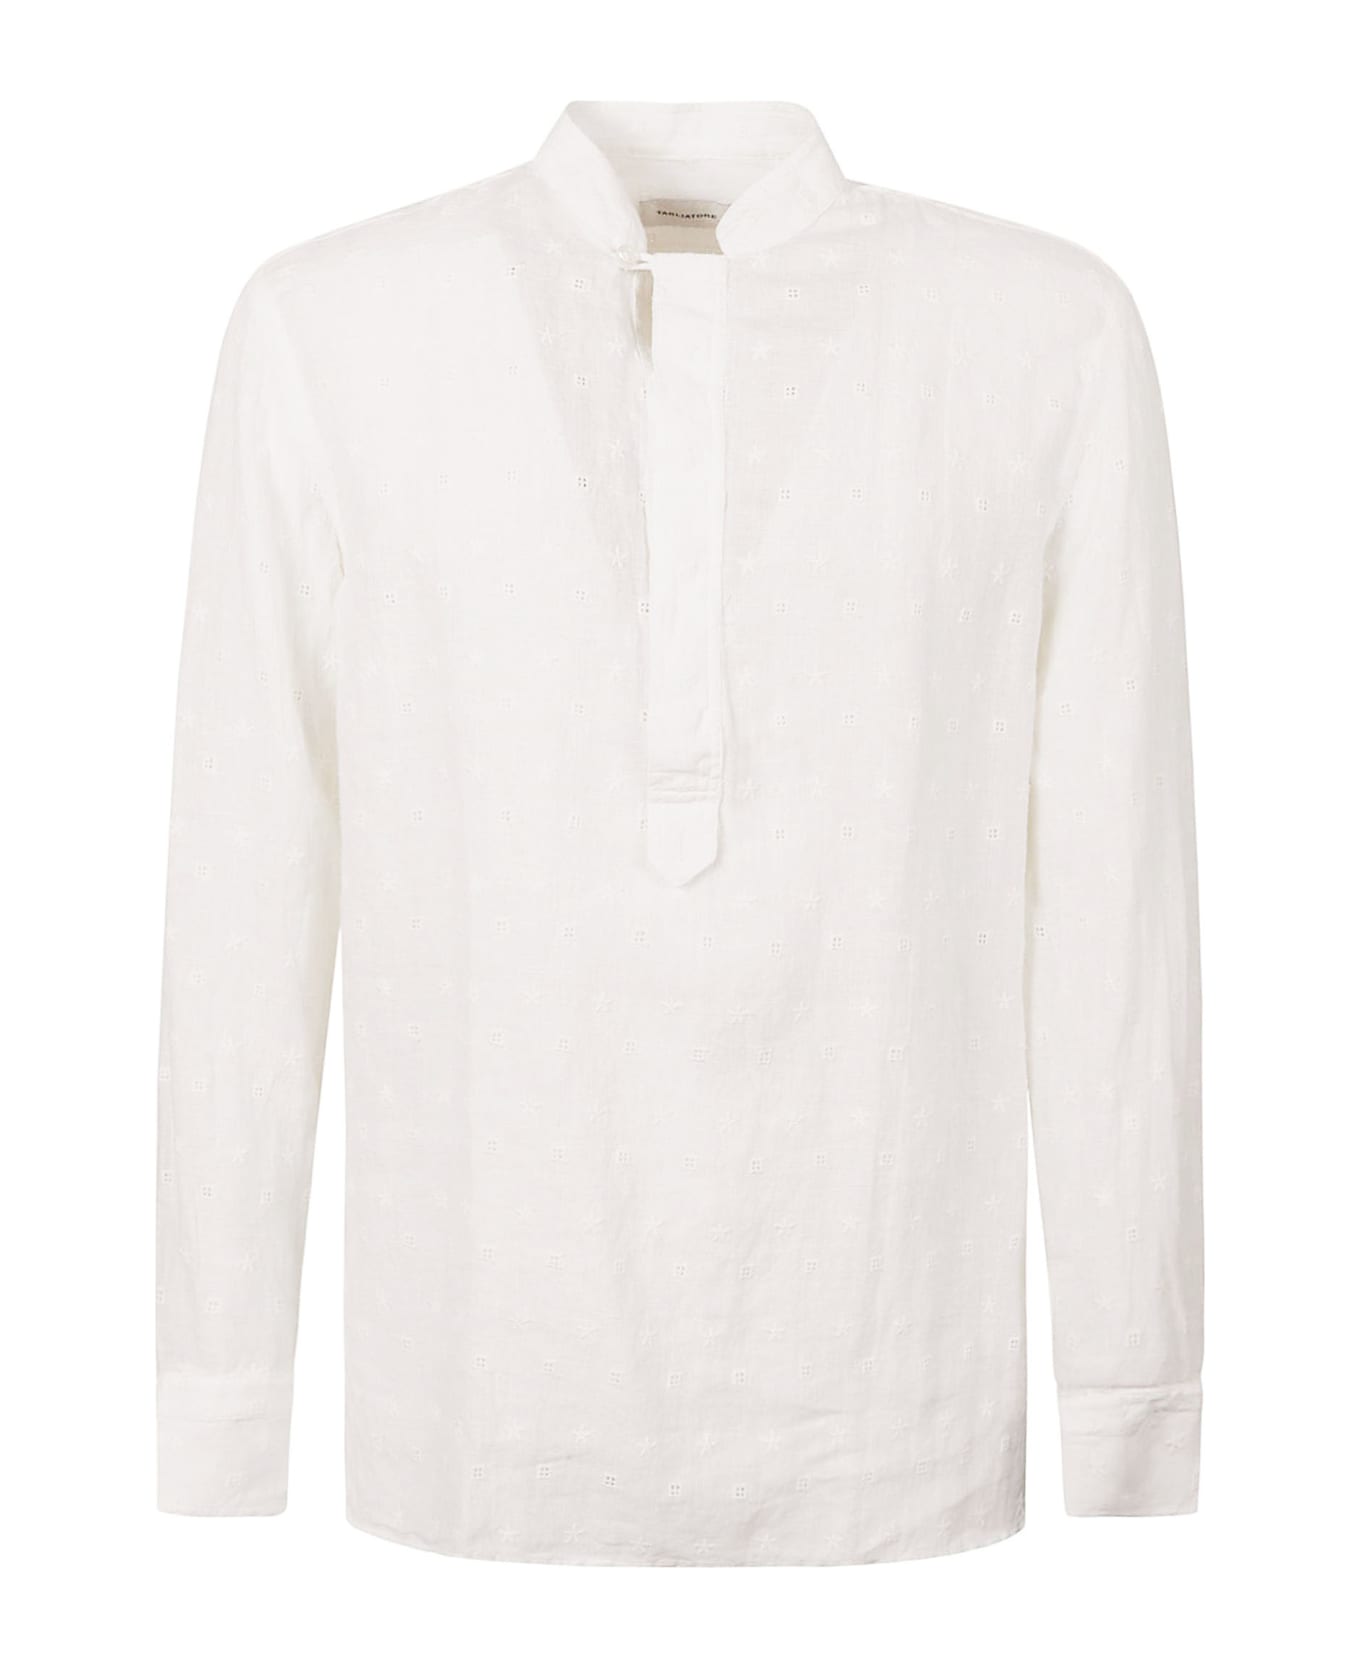 Tagliatore Embroidered Detail Long-sleeved Shirt - White シャツ